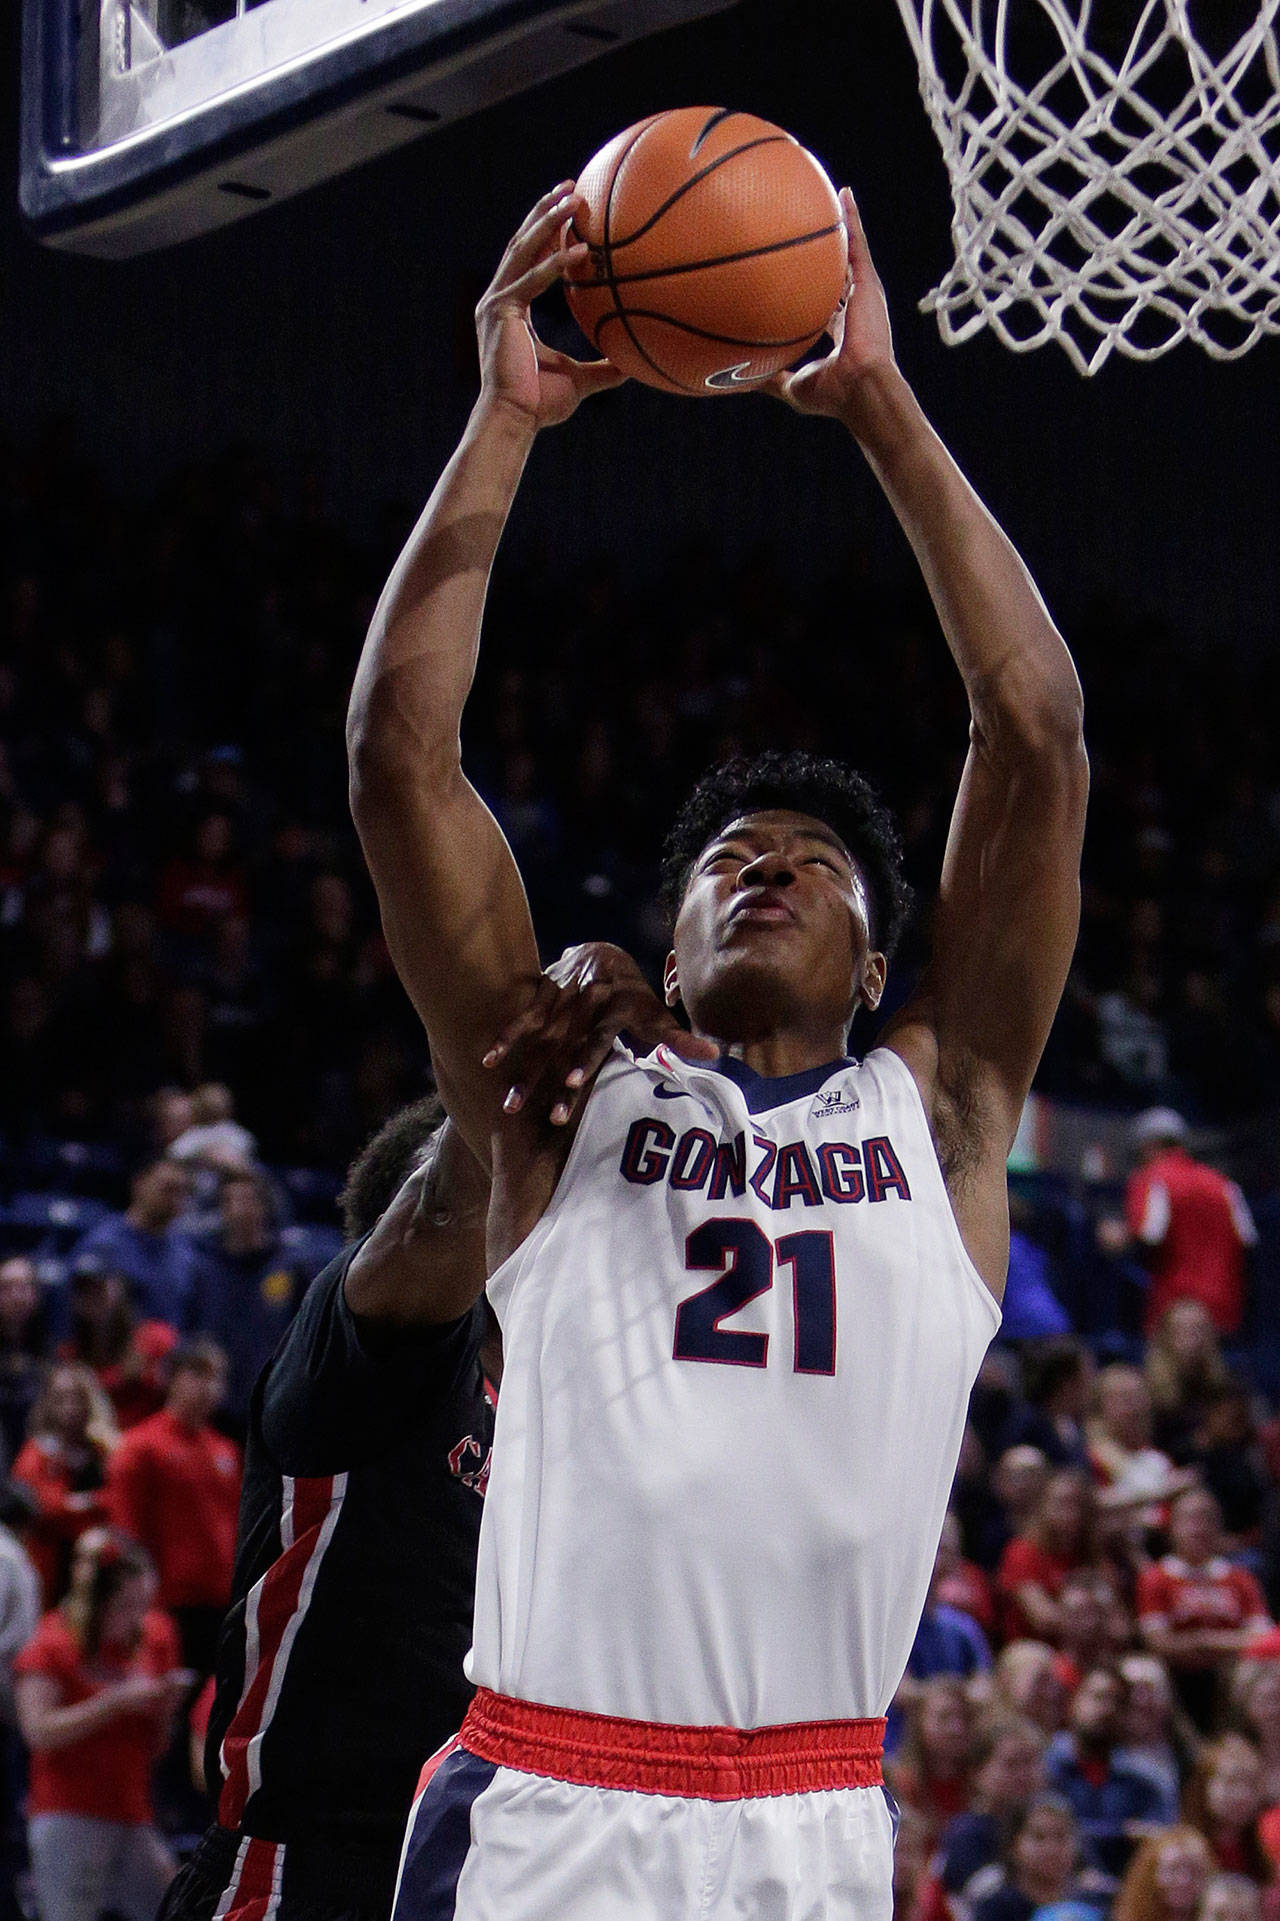 Gonzaga forward Rui Hachimura (21) shoots during the first half of a game against Incarnate Word on Nov. 29, 2017, in Spokane. (AP Photo/Young Kwak)